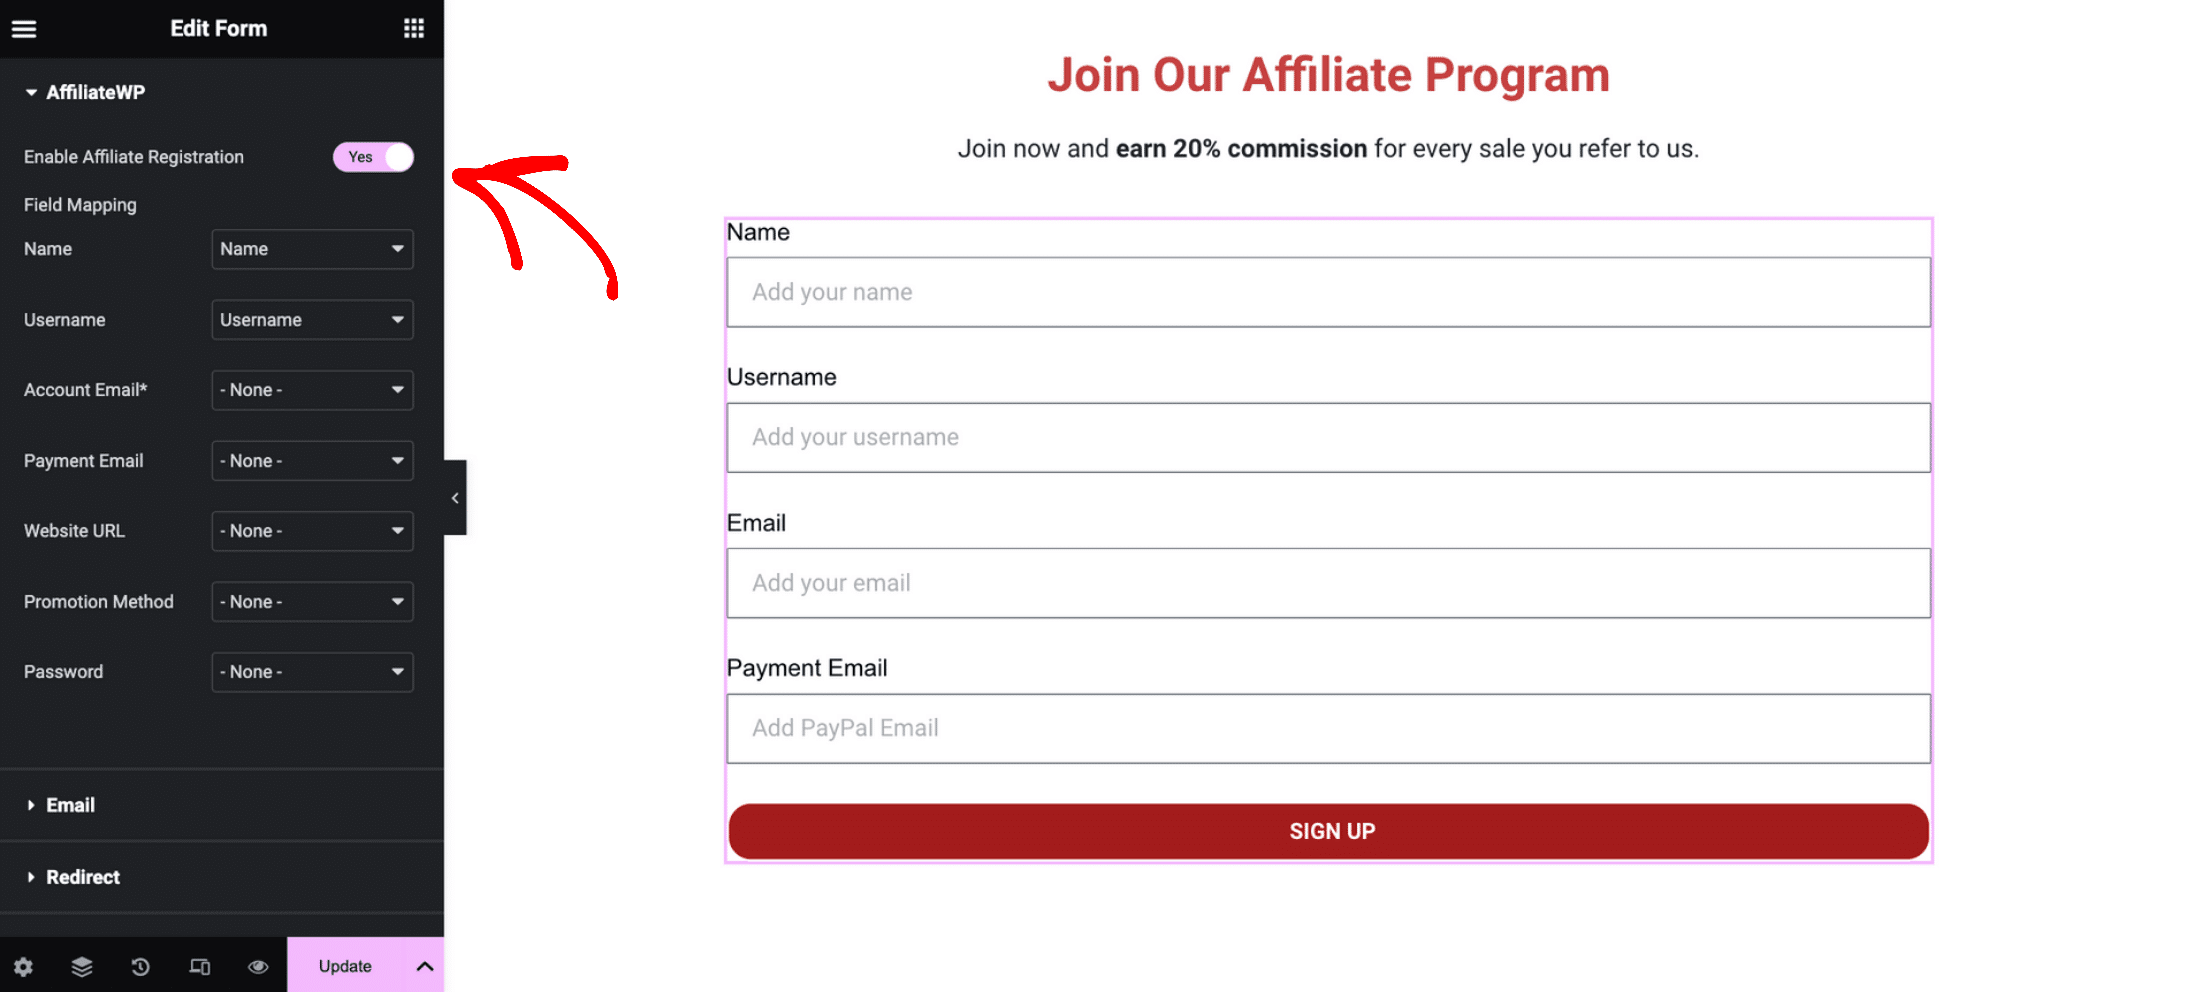 The Enable Affiliate Registration toggle switch